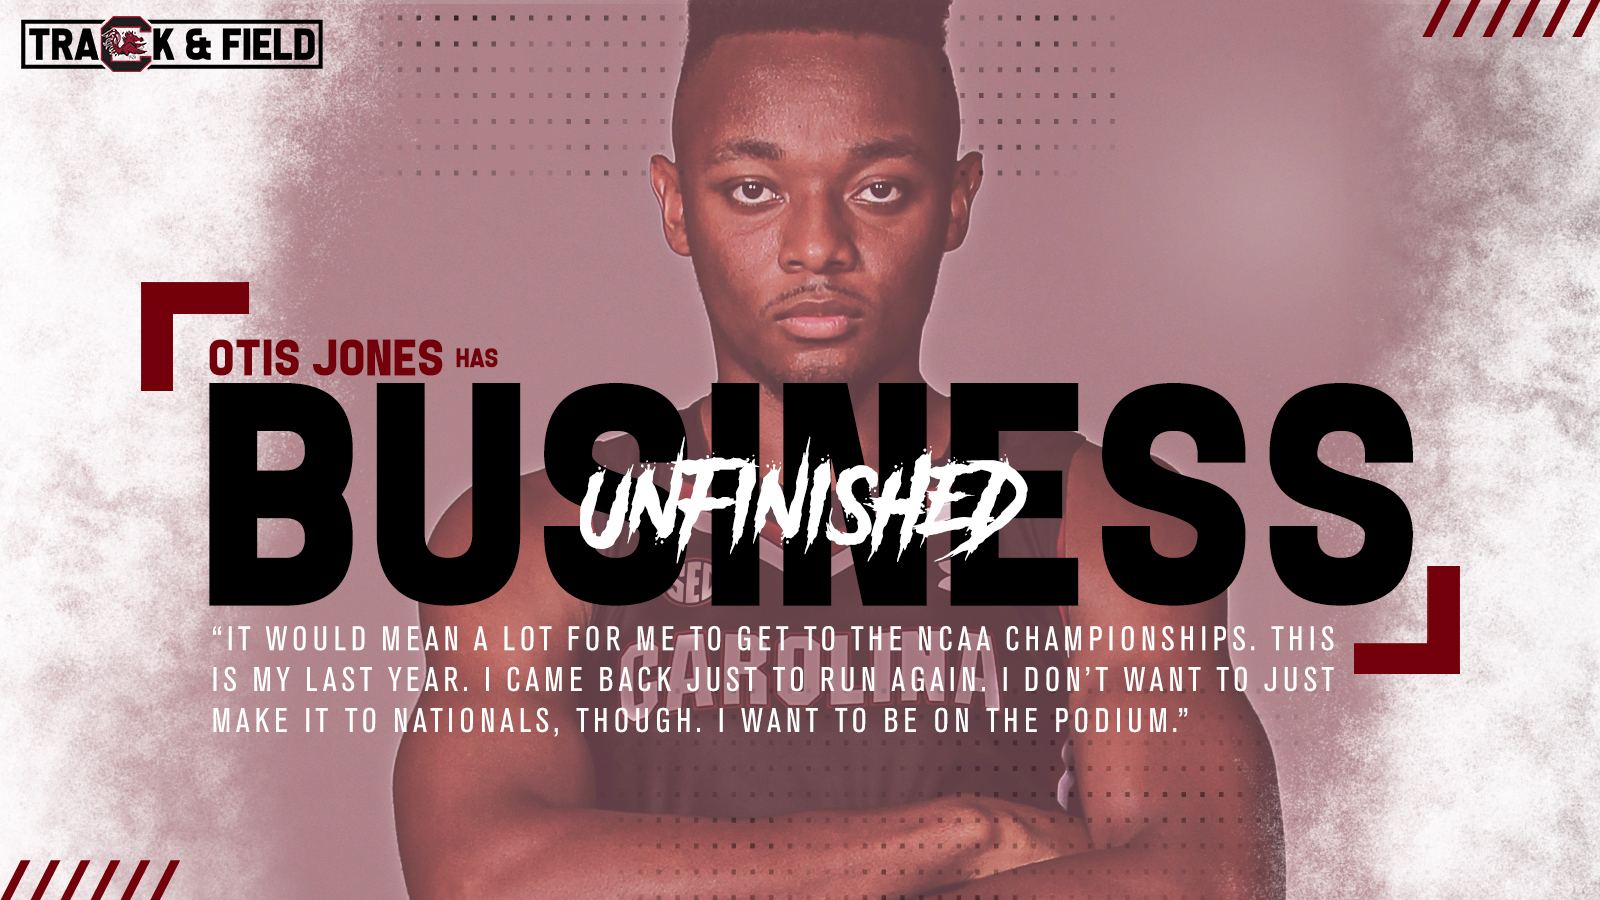 Unfinished Business: Otis Jones is Determined to Make Every Rep Count